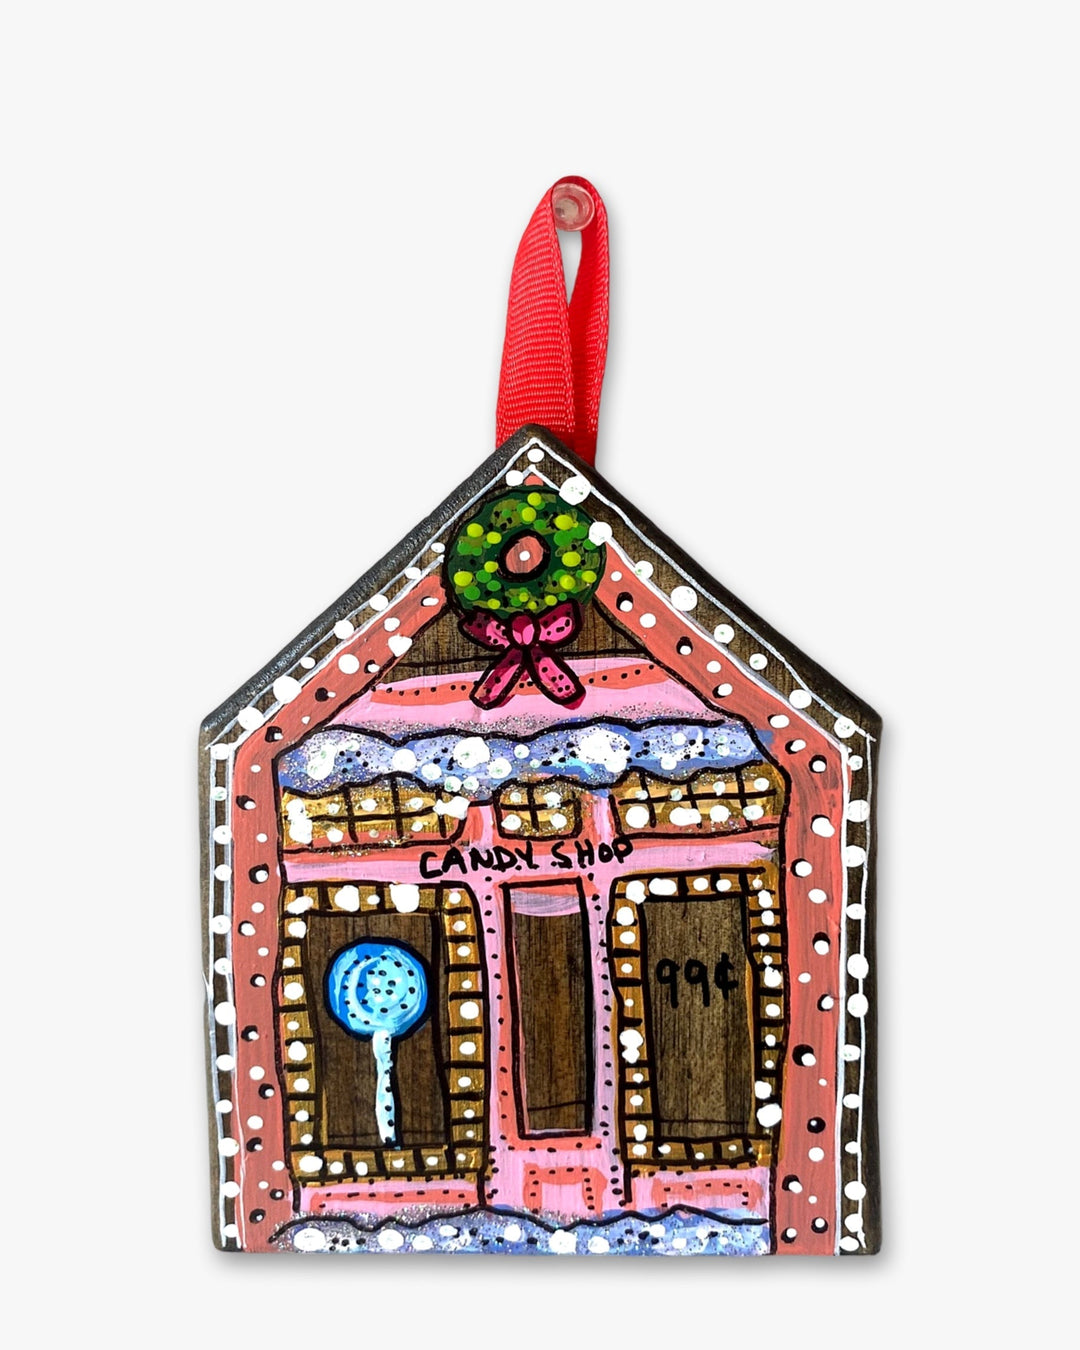 Candy Shop - Hand Painted Ornament - Heather Freitas 